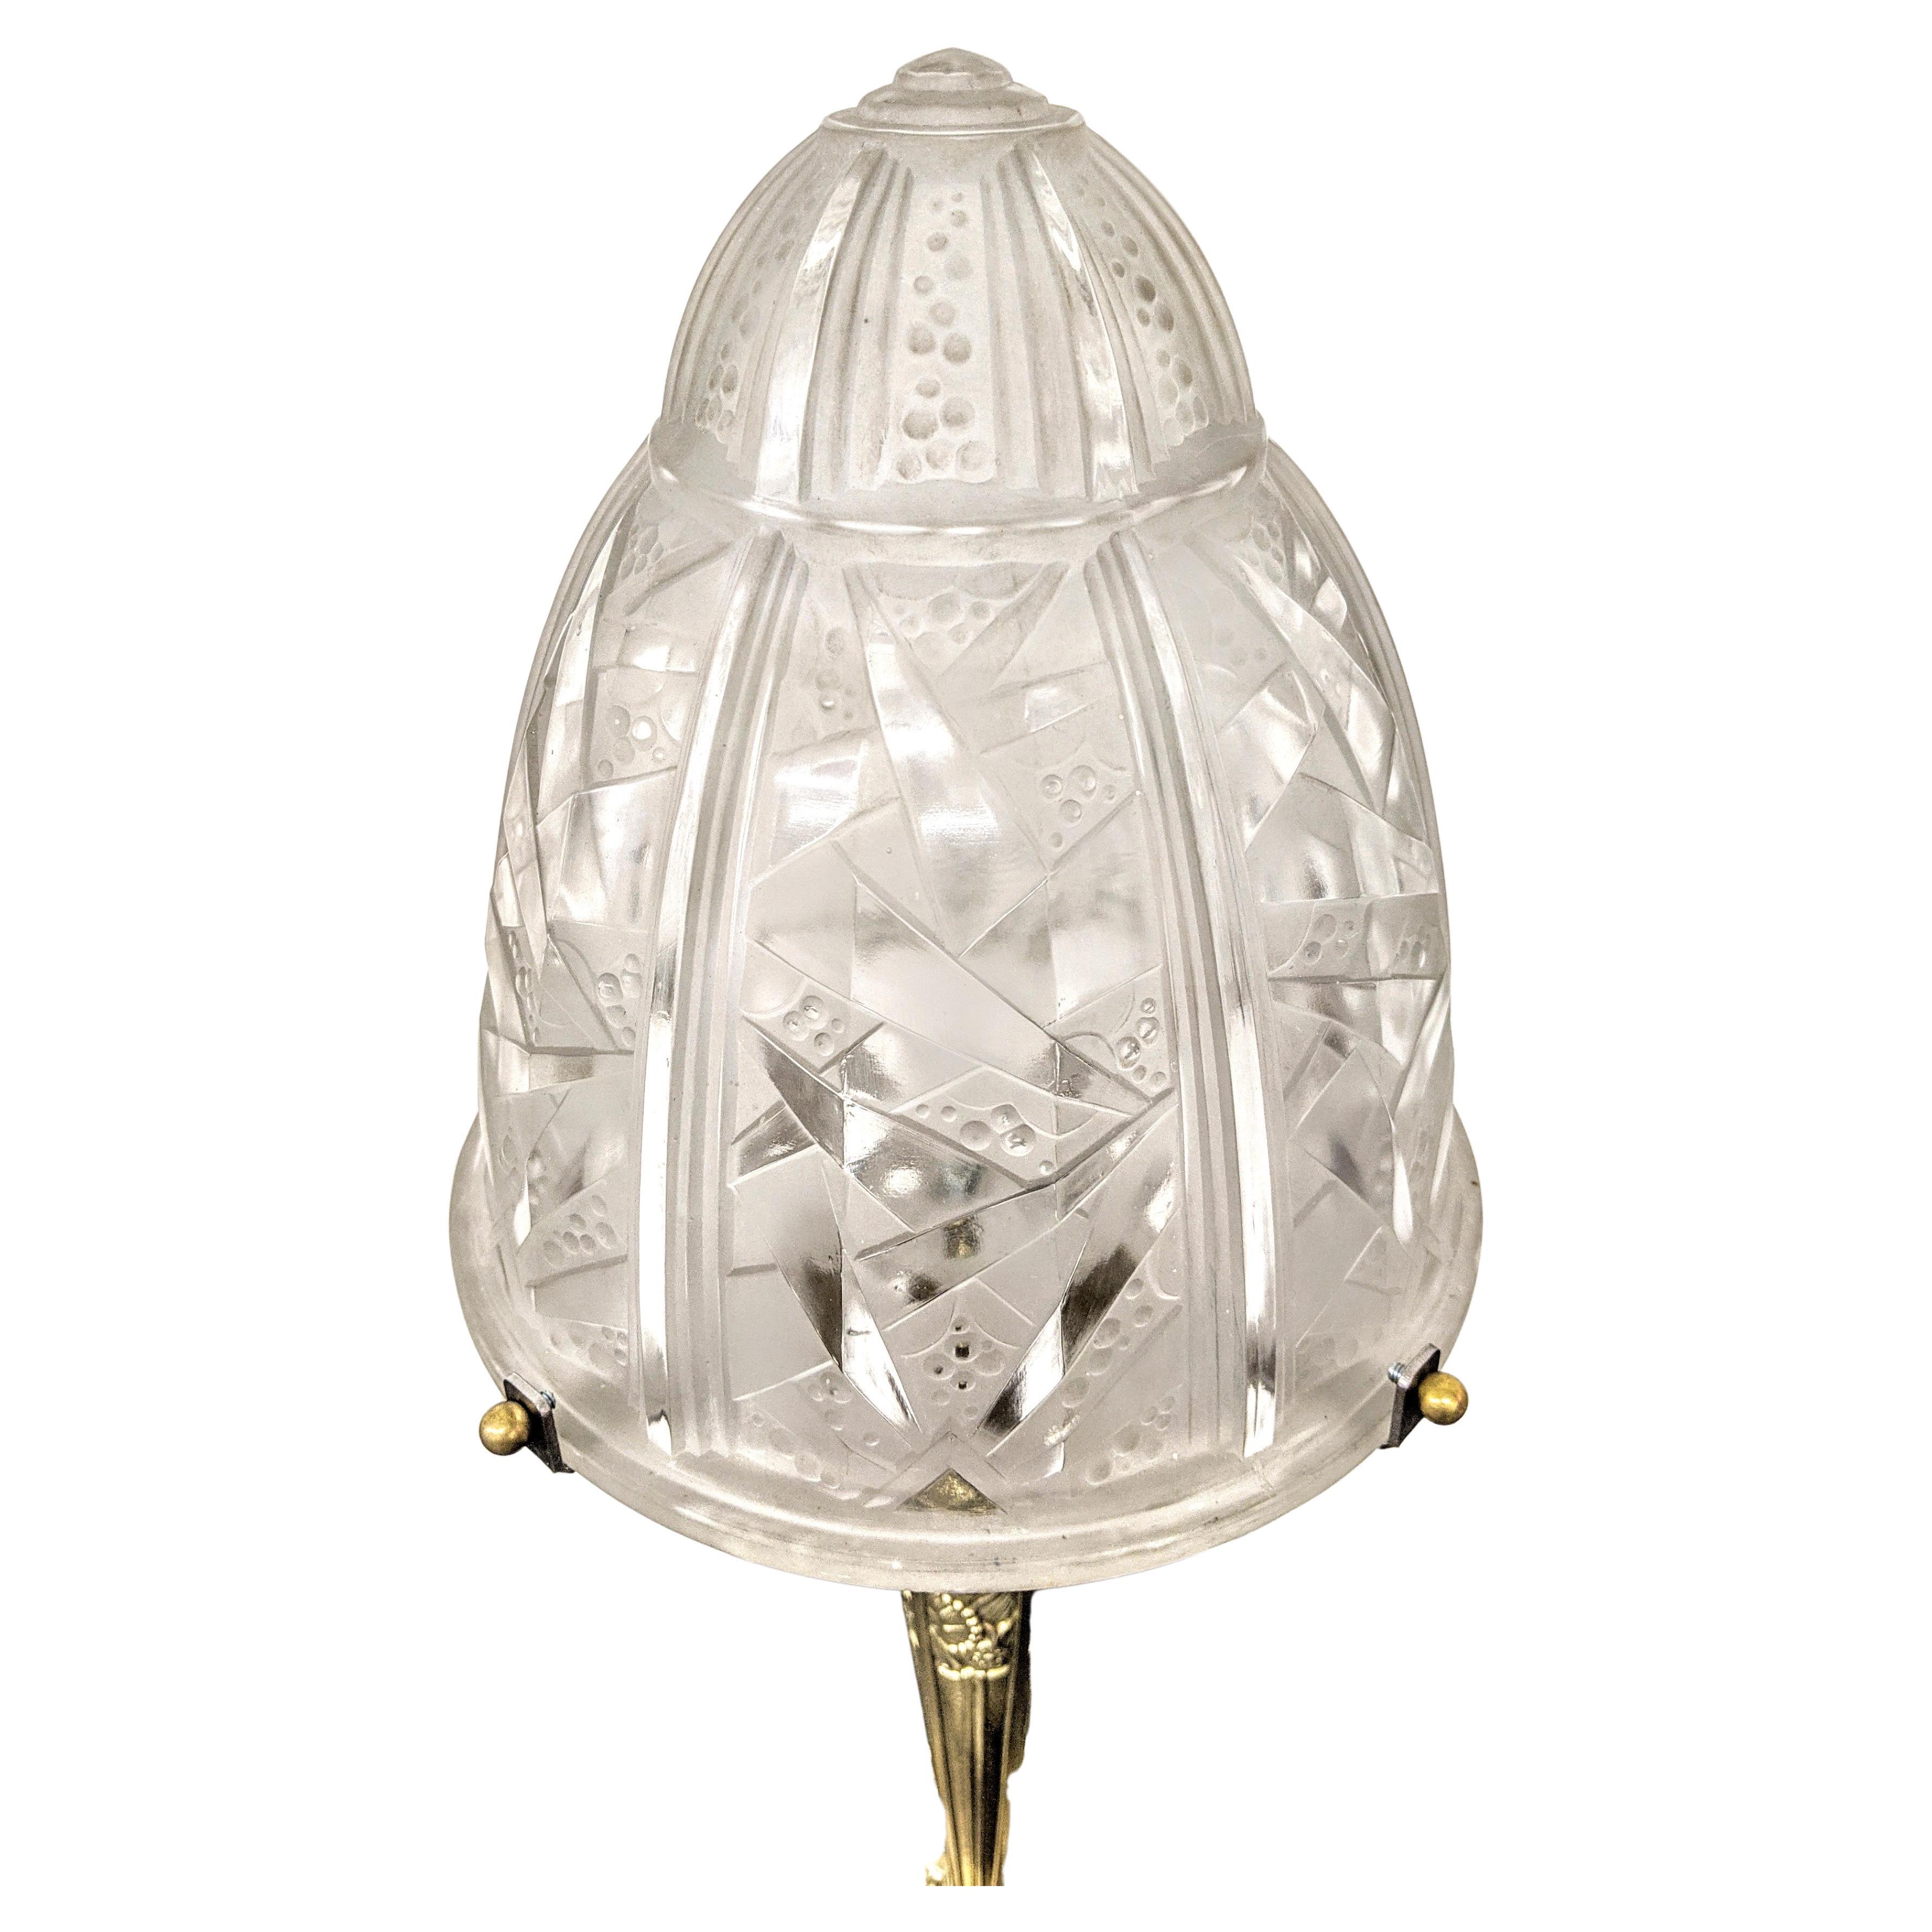 A stunning pair of French Art Deco table lamps were created by Muller Frères in great condition. Each shade is enhanced by a typical French Art Deco geometric motif in frosted glass with polished details. Mounted on a Bronze with flowers and a